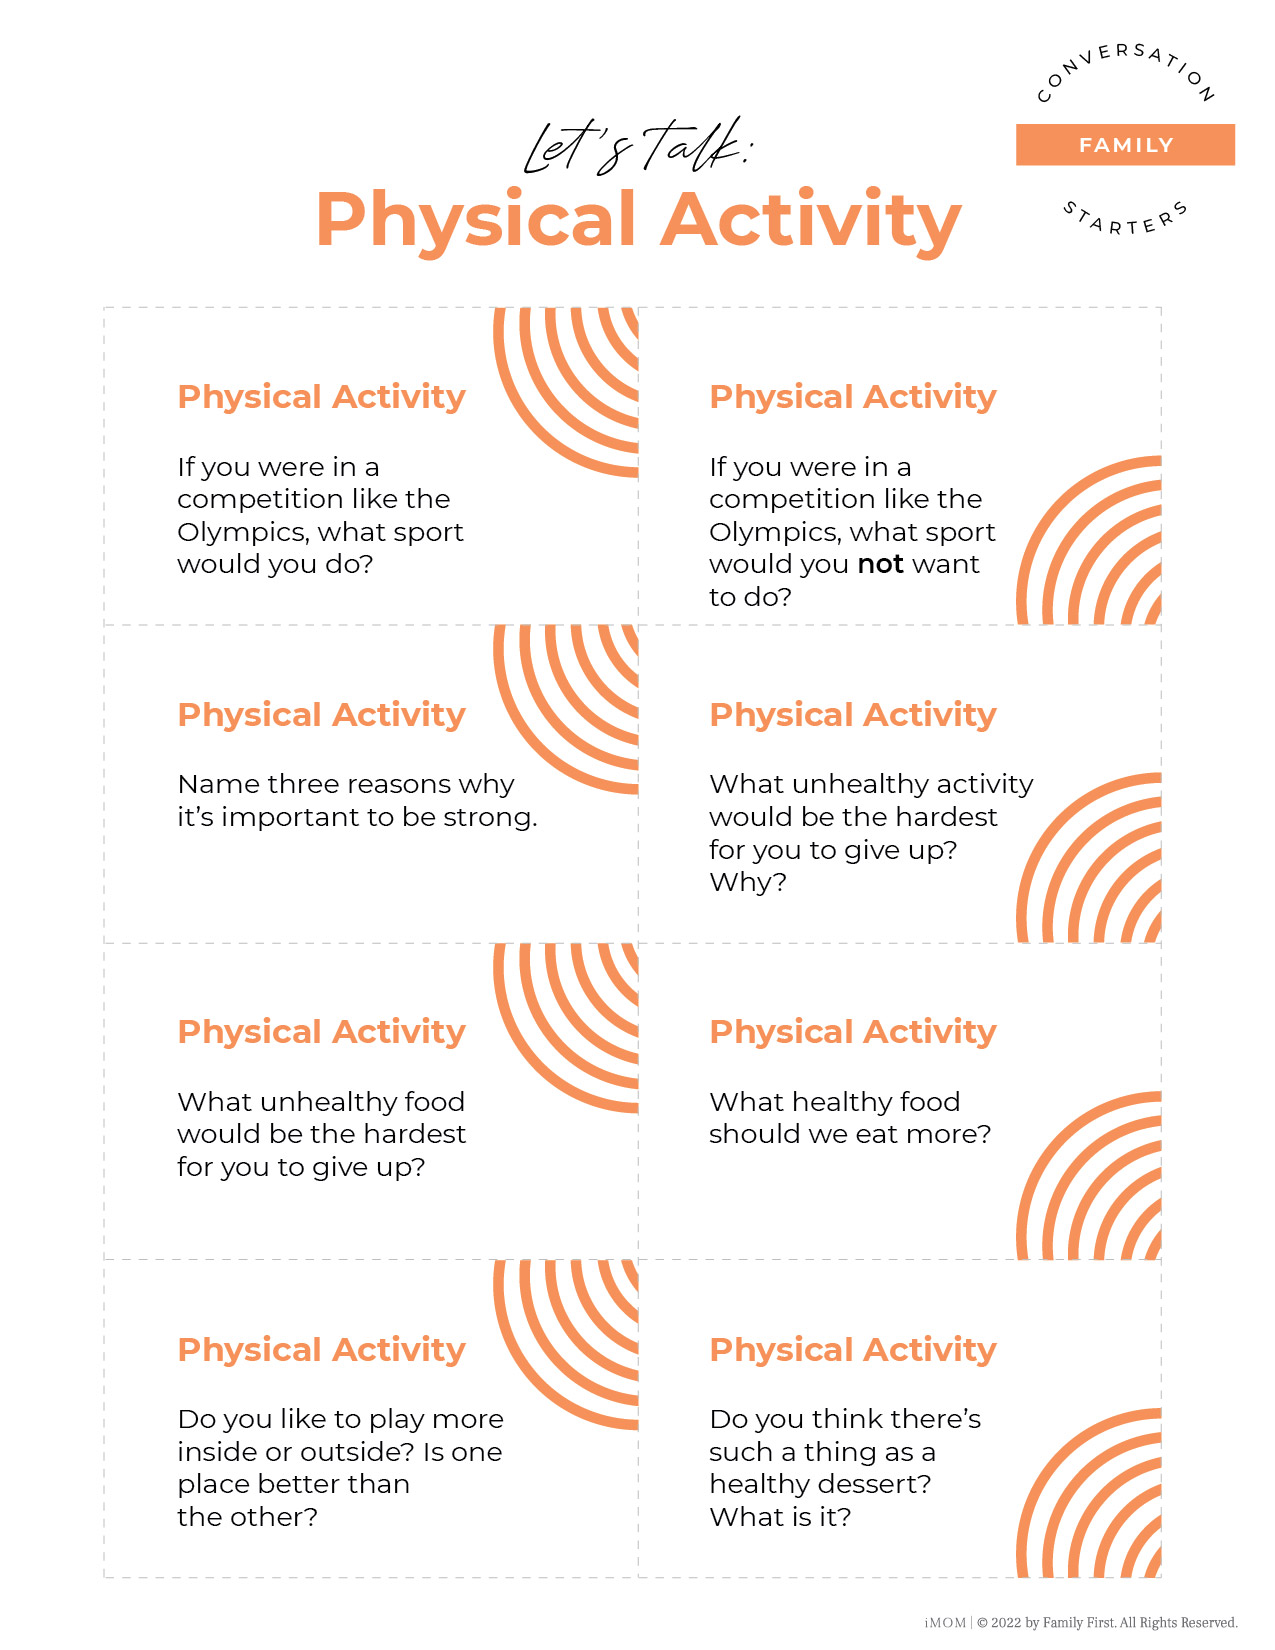 benefits of physical activity